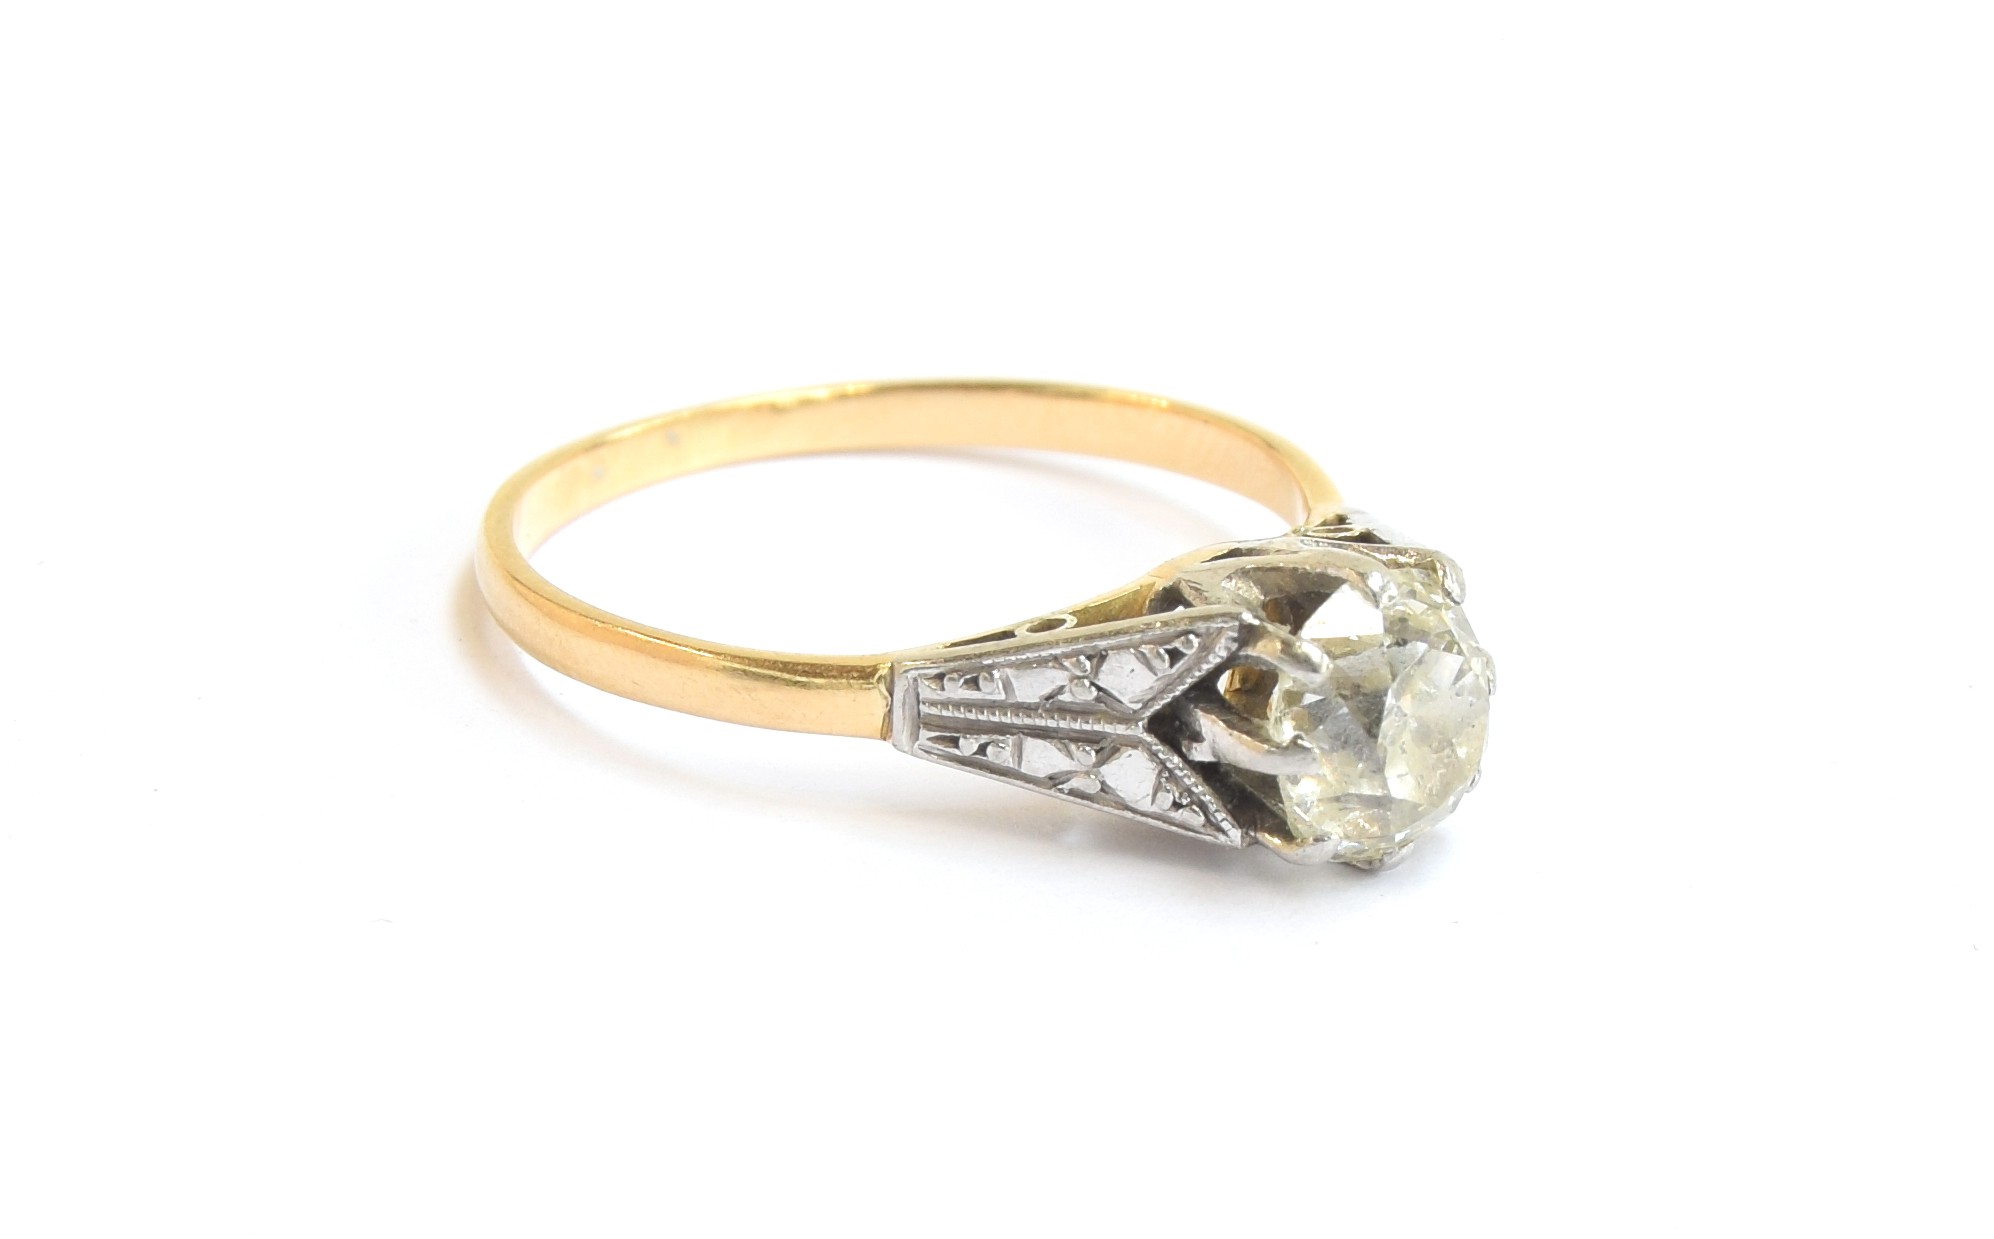 An early 20th century 18ct gold and platinum set diamond solitaire ring, the large old cut diamond - Image 2 of 2